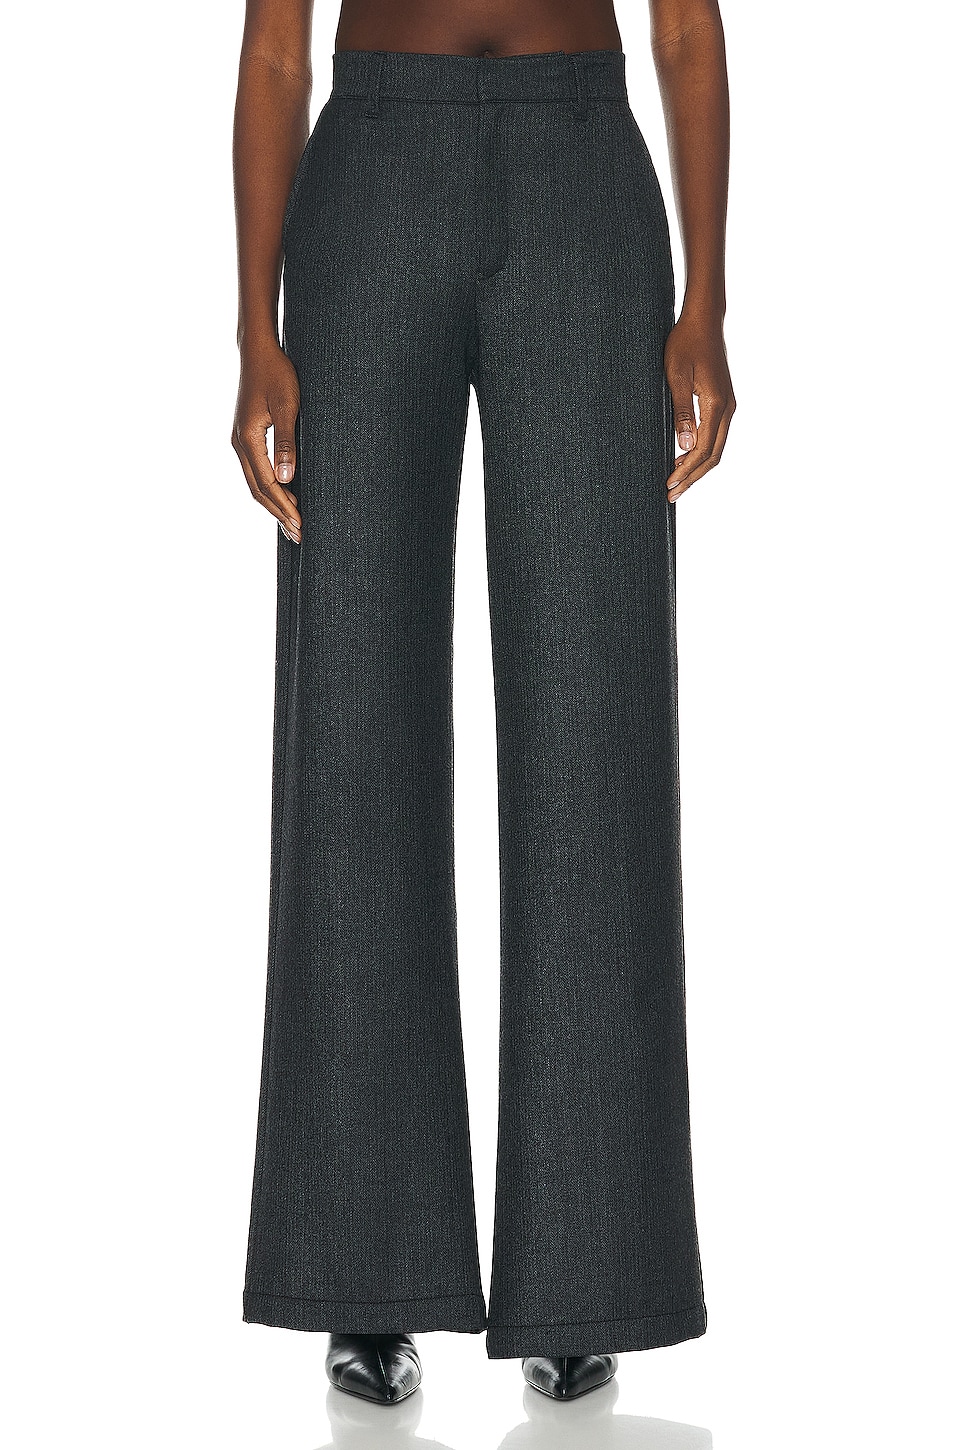 Image 1 of SPRWMN Trouser in Charcoal